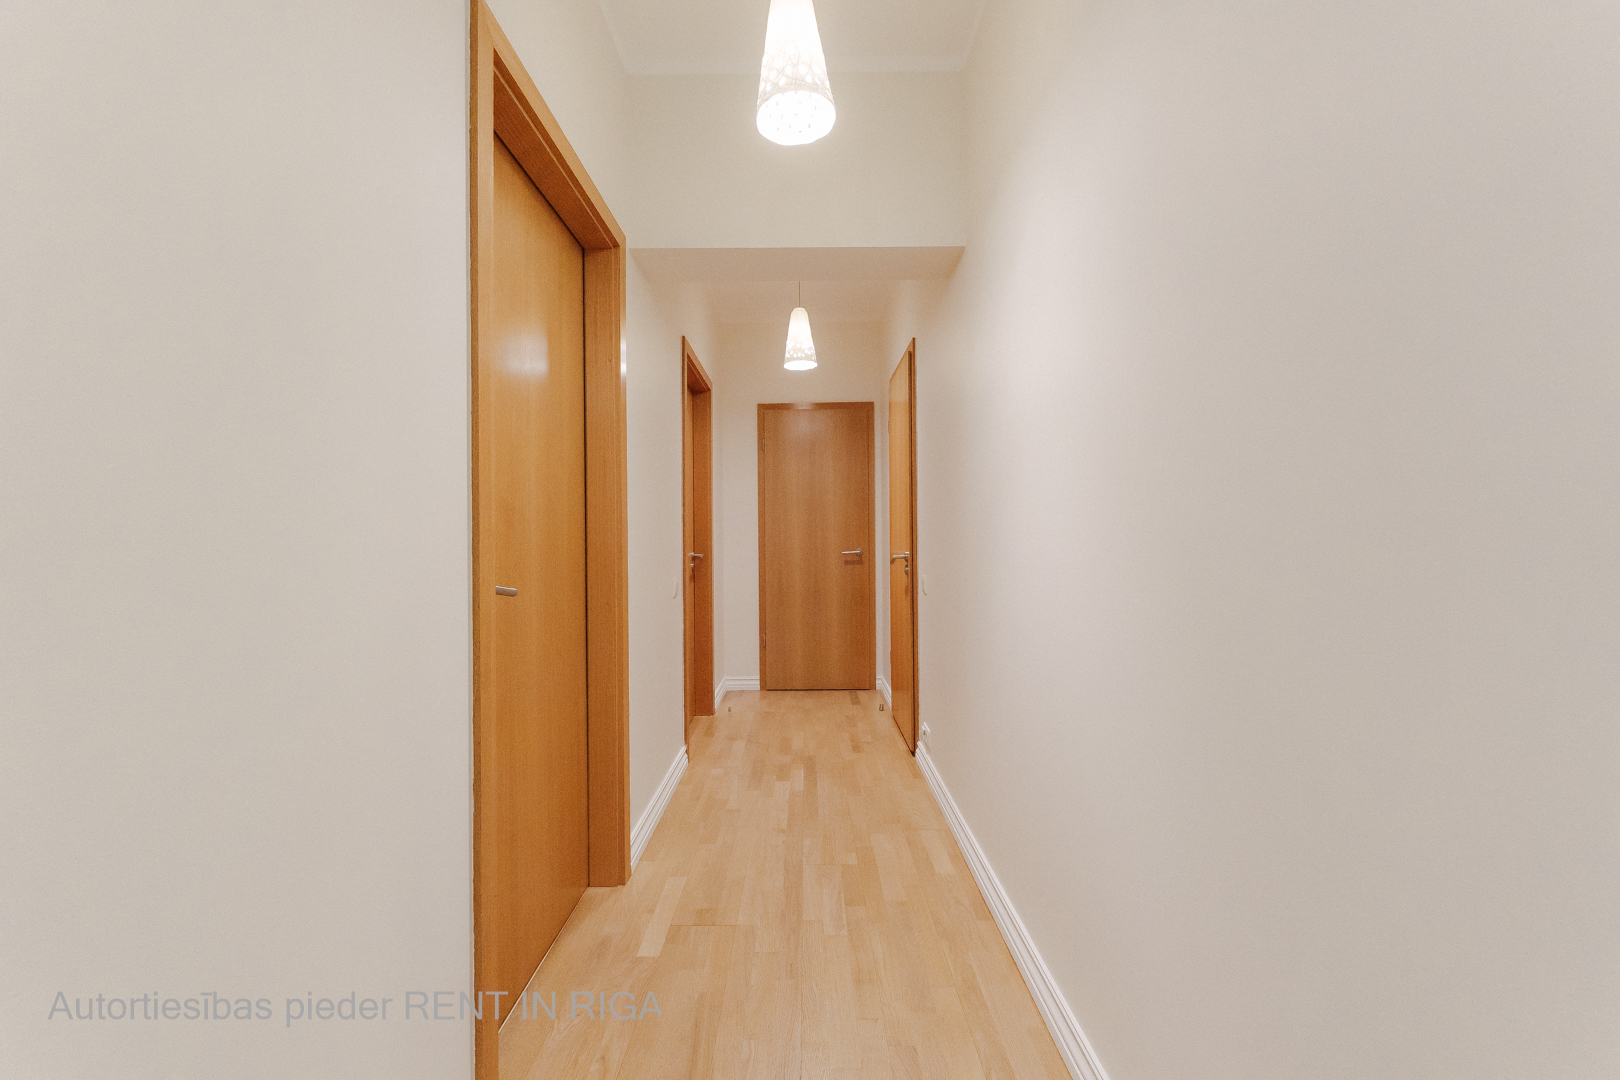 Apartment for rent, Skanstes street 29a - Image 1